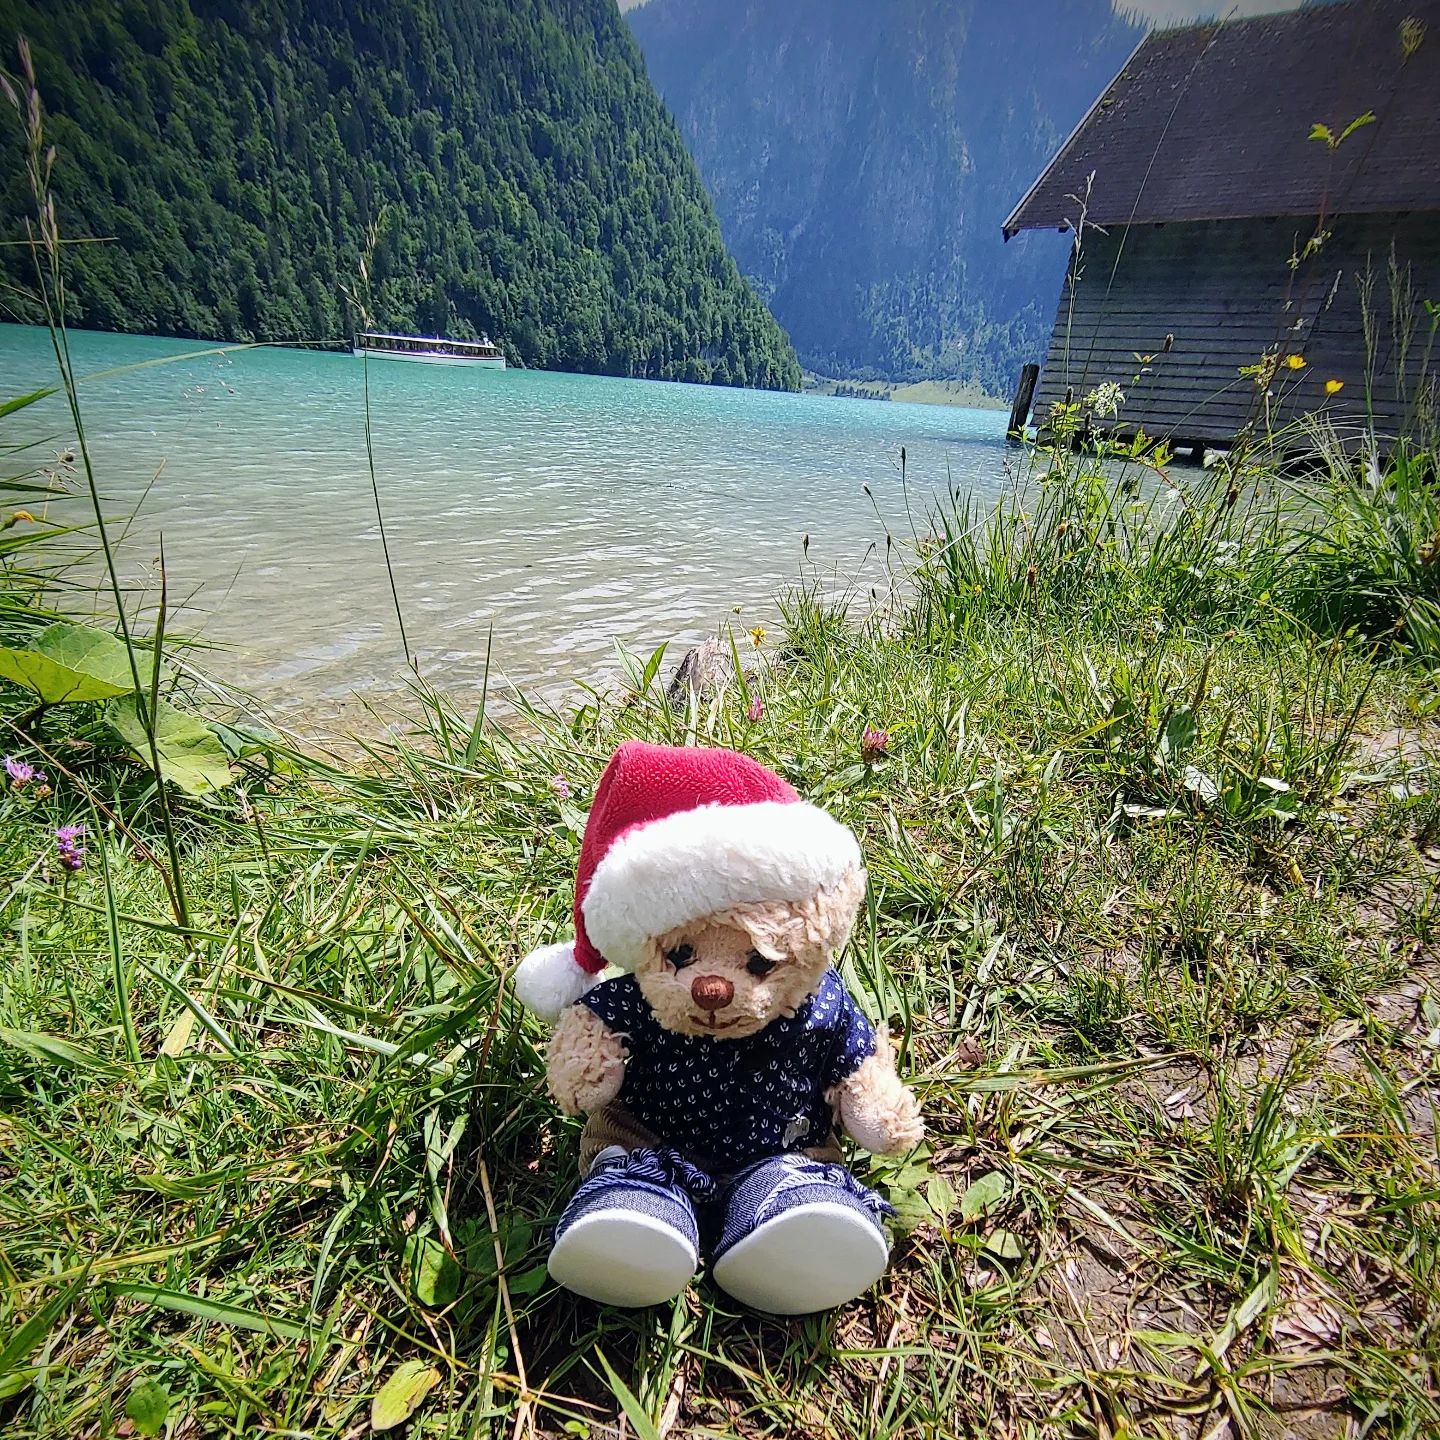 “What you do makes a difference, and you have to decide what kind of difference you want to make.” by Jane Goodall
#berchtesgadenerland  #königssee #konigseelake #naturliebe #königseebayern #konigsee #animalsarefriendsnotfood #bekindtoeverykind #peaceforanimals #veganfortheanimals